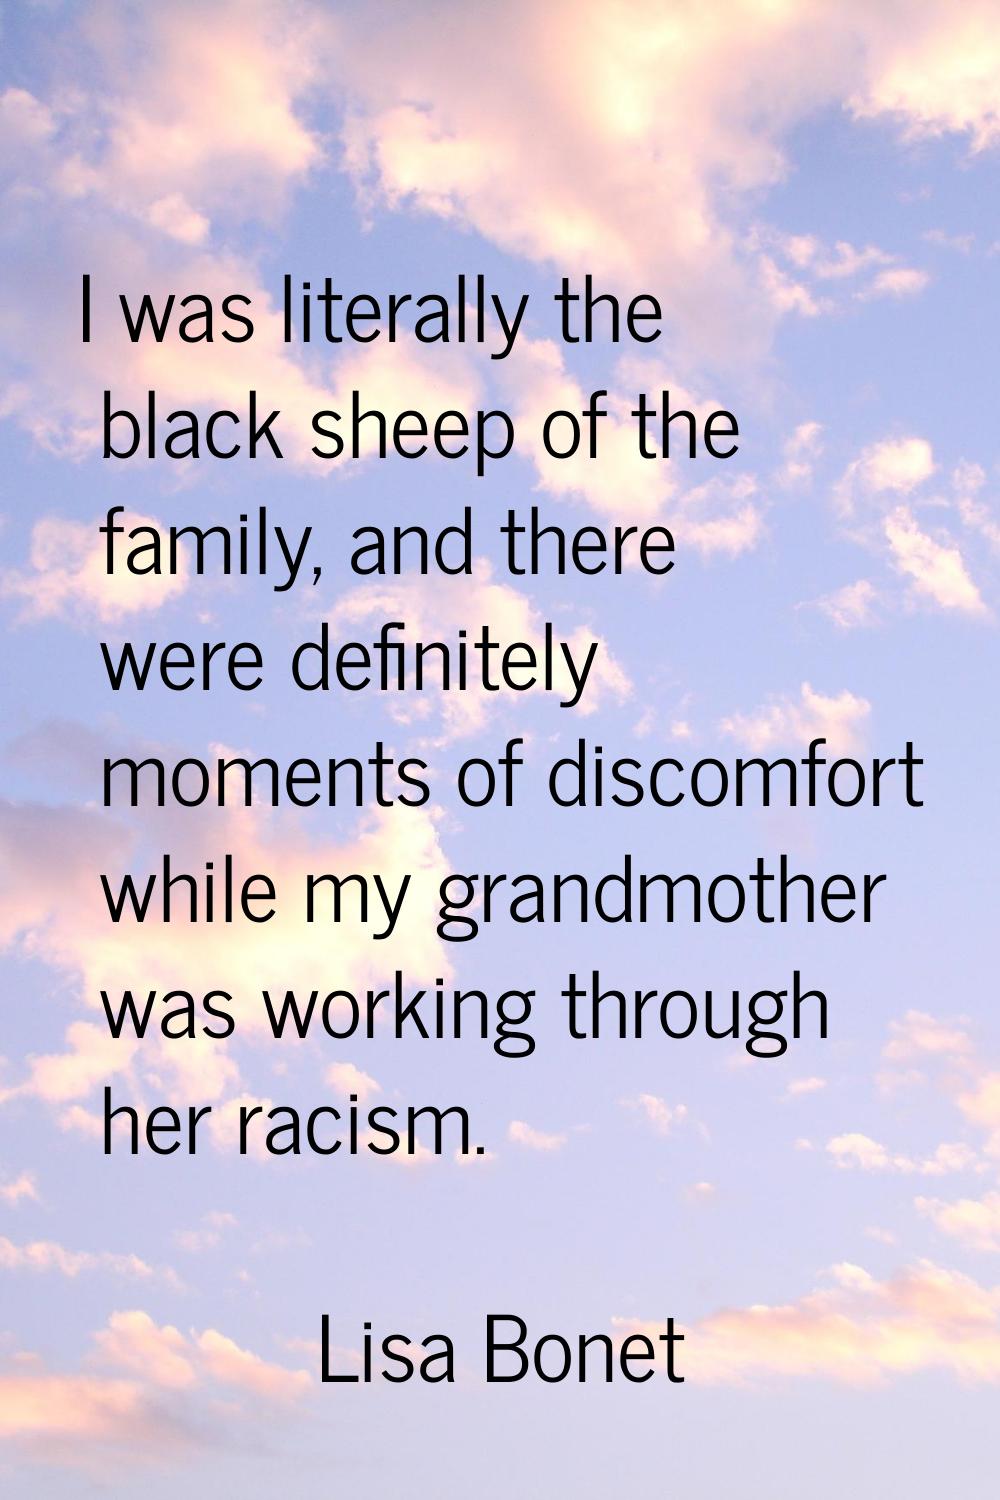 I was literally the black sheep of the family, and there were definitely moments of discomfort whil